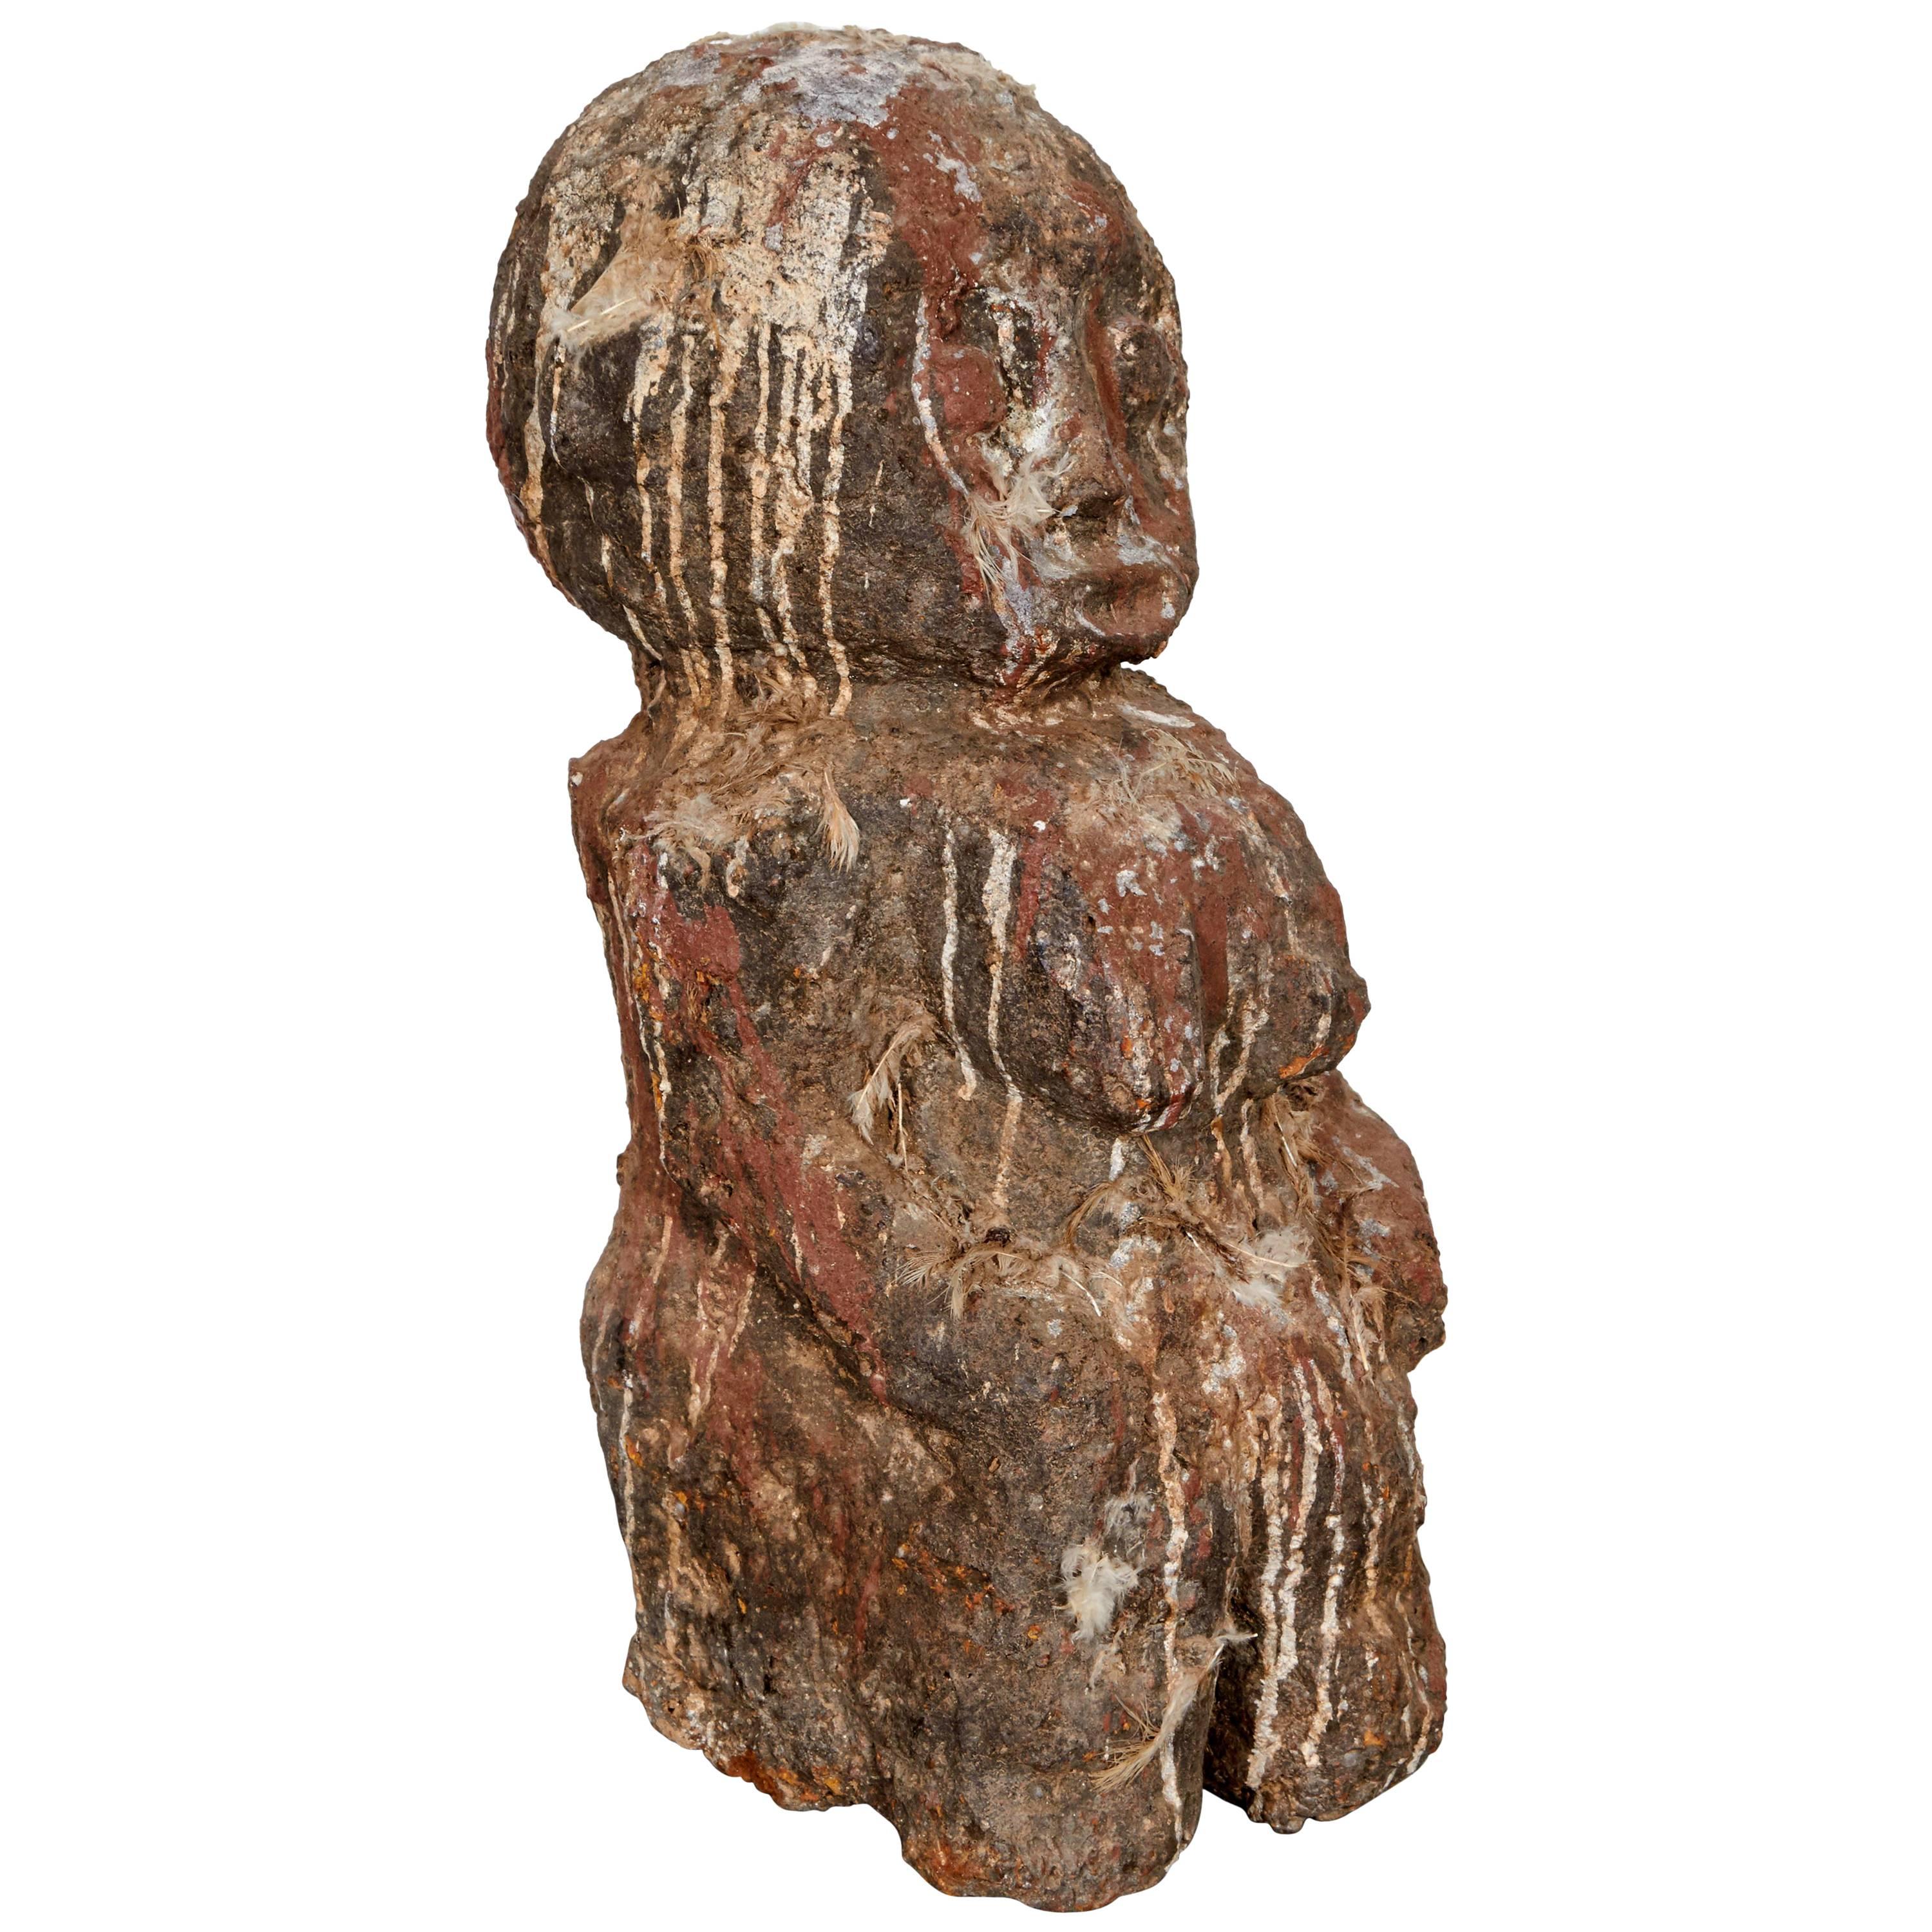 West African Stone Shrine Figure Sculpture, Great Patina and Texture